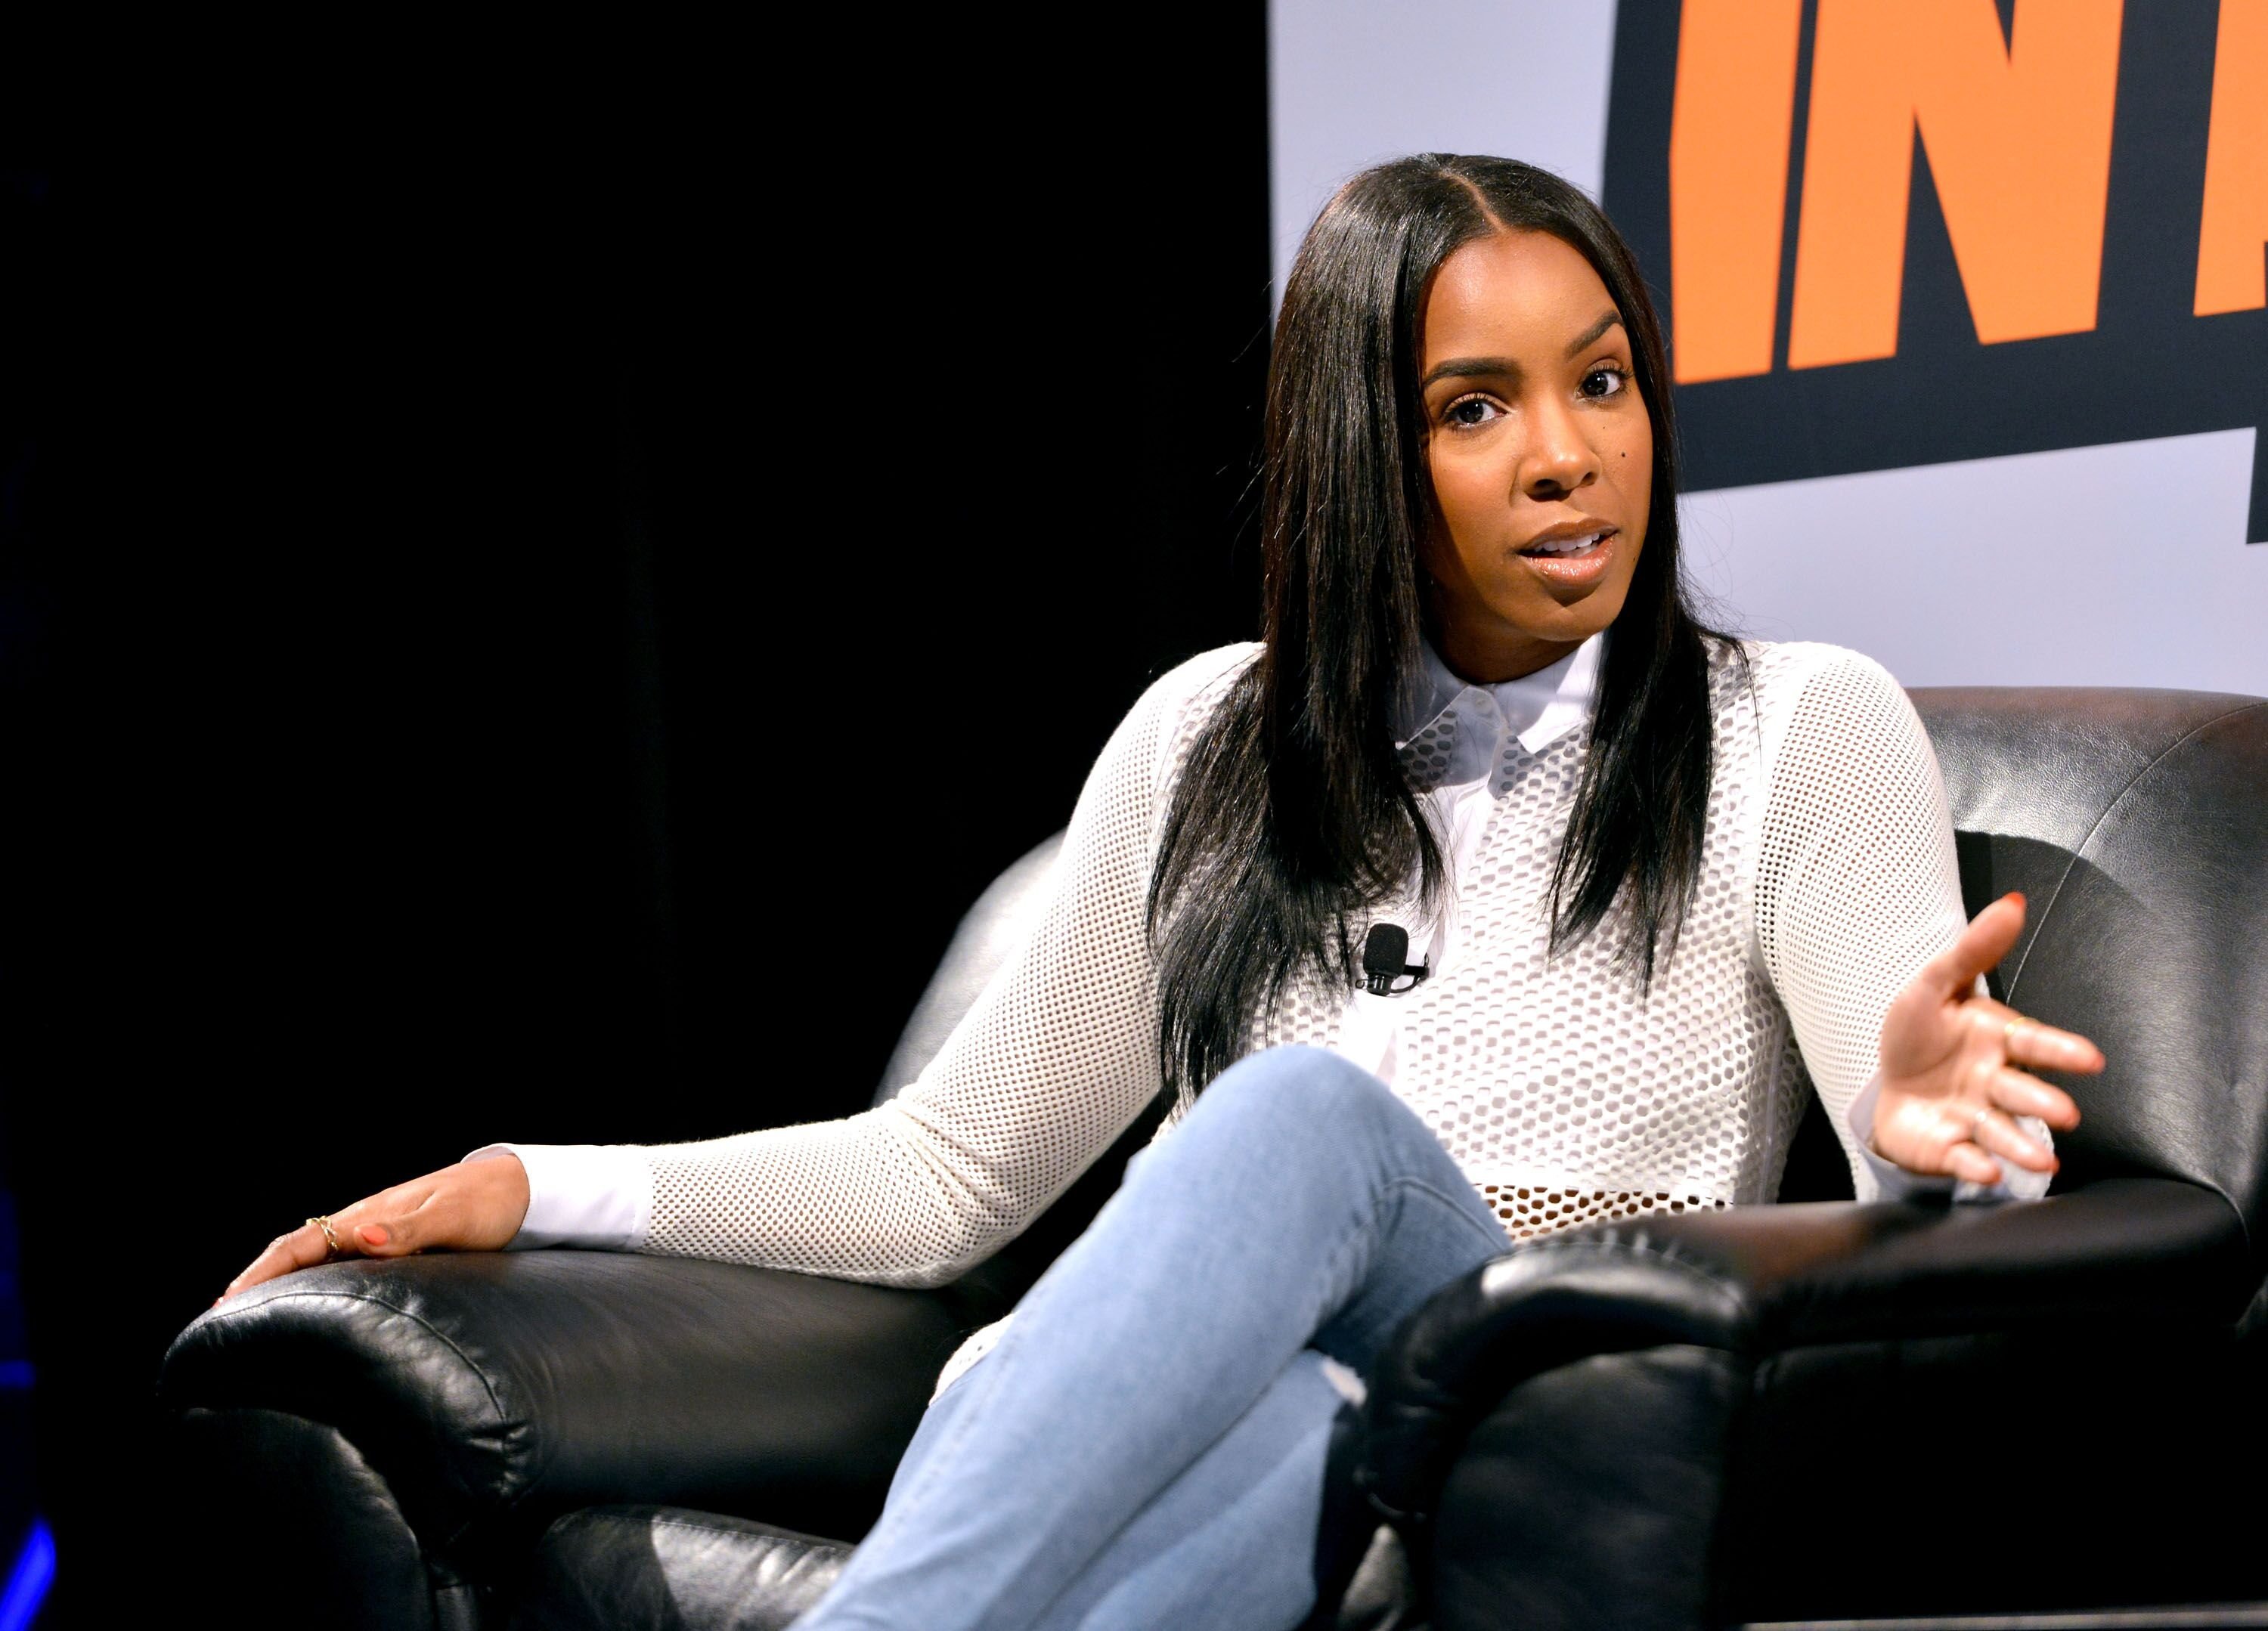 Kelly Rowland speaking onstage during an interview at the 2016 SXSW Music, Film + Interactive Festival. | Photo: Getty Images